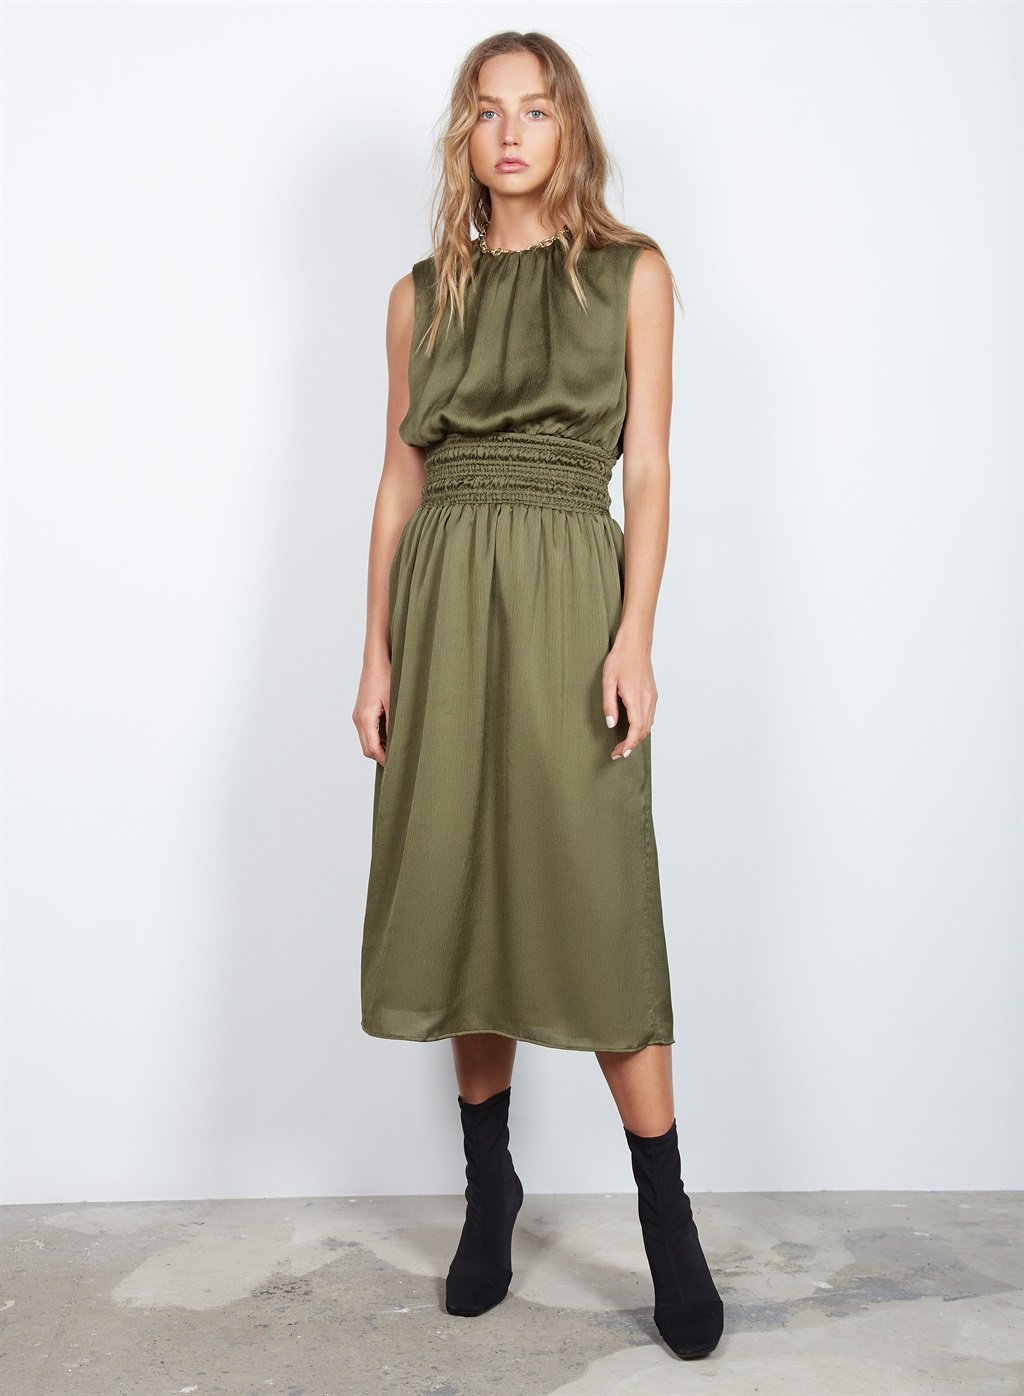 Drifter Dress by Wish the Label